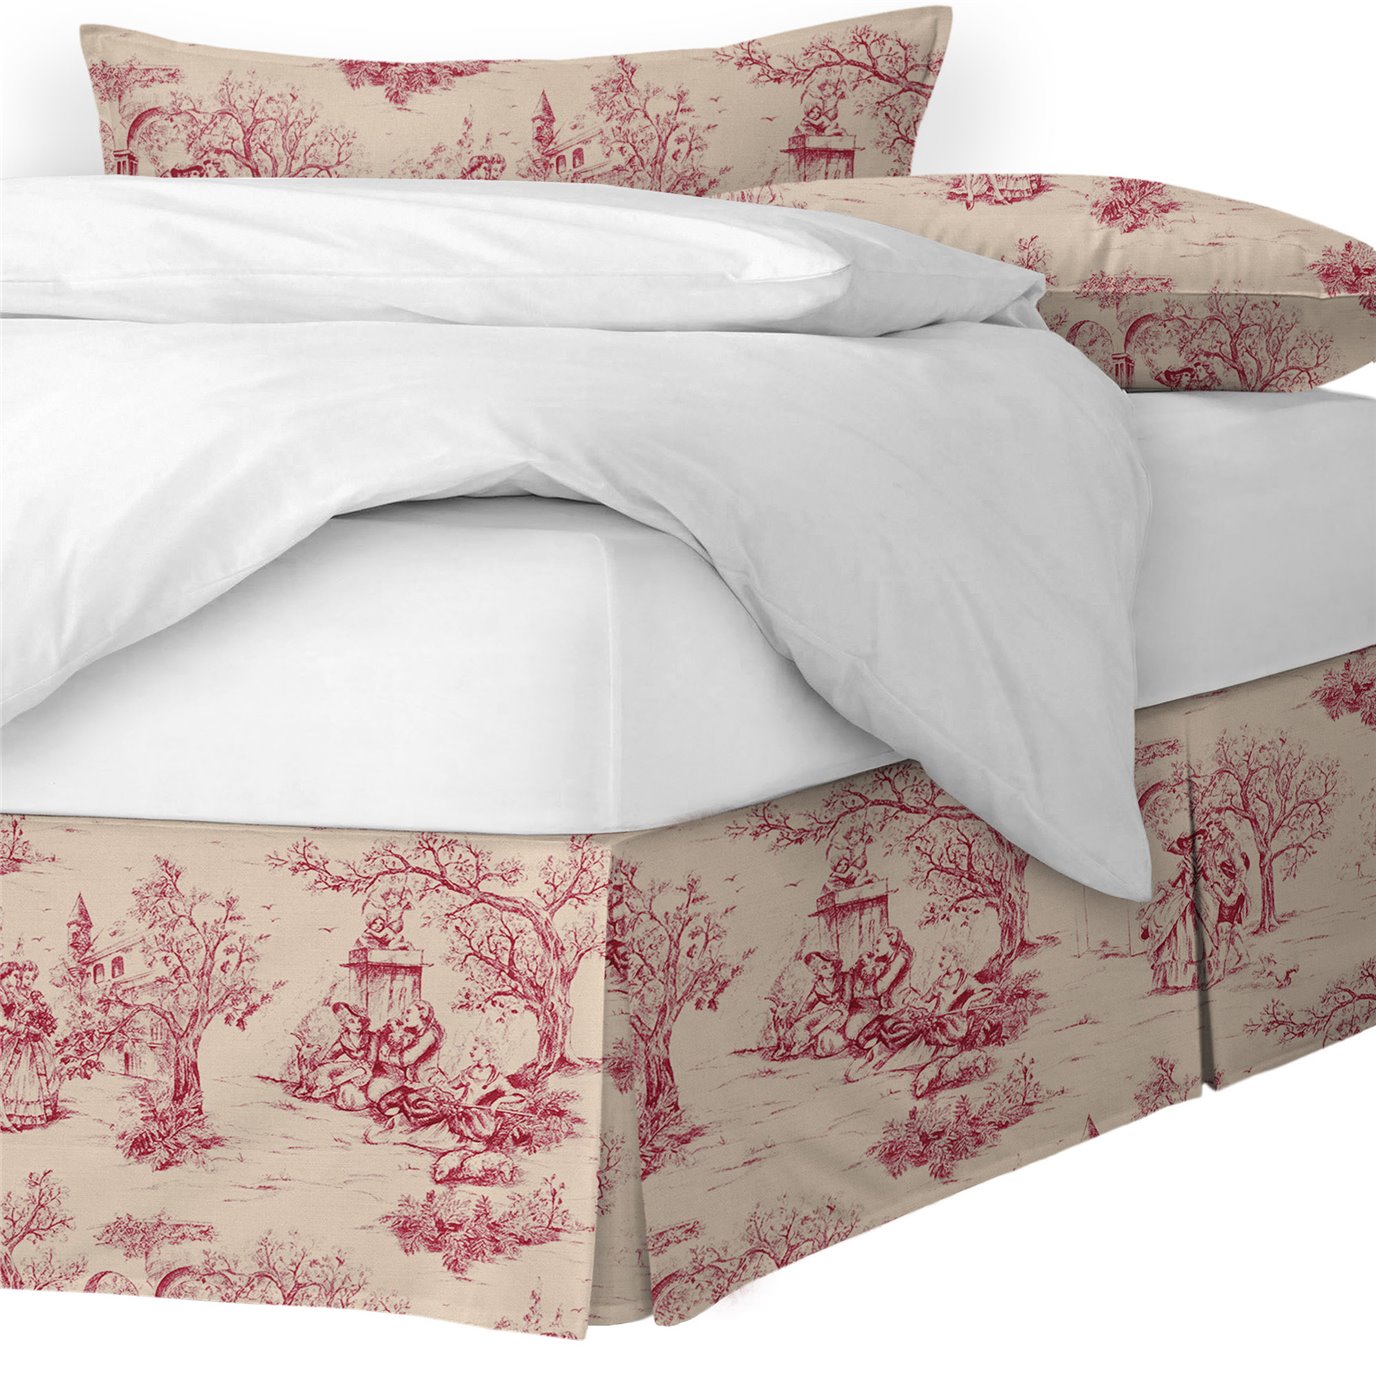 Archamps Toile Red Platform Bed Skirt - Size Twin 15" Drop